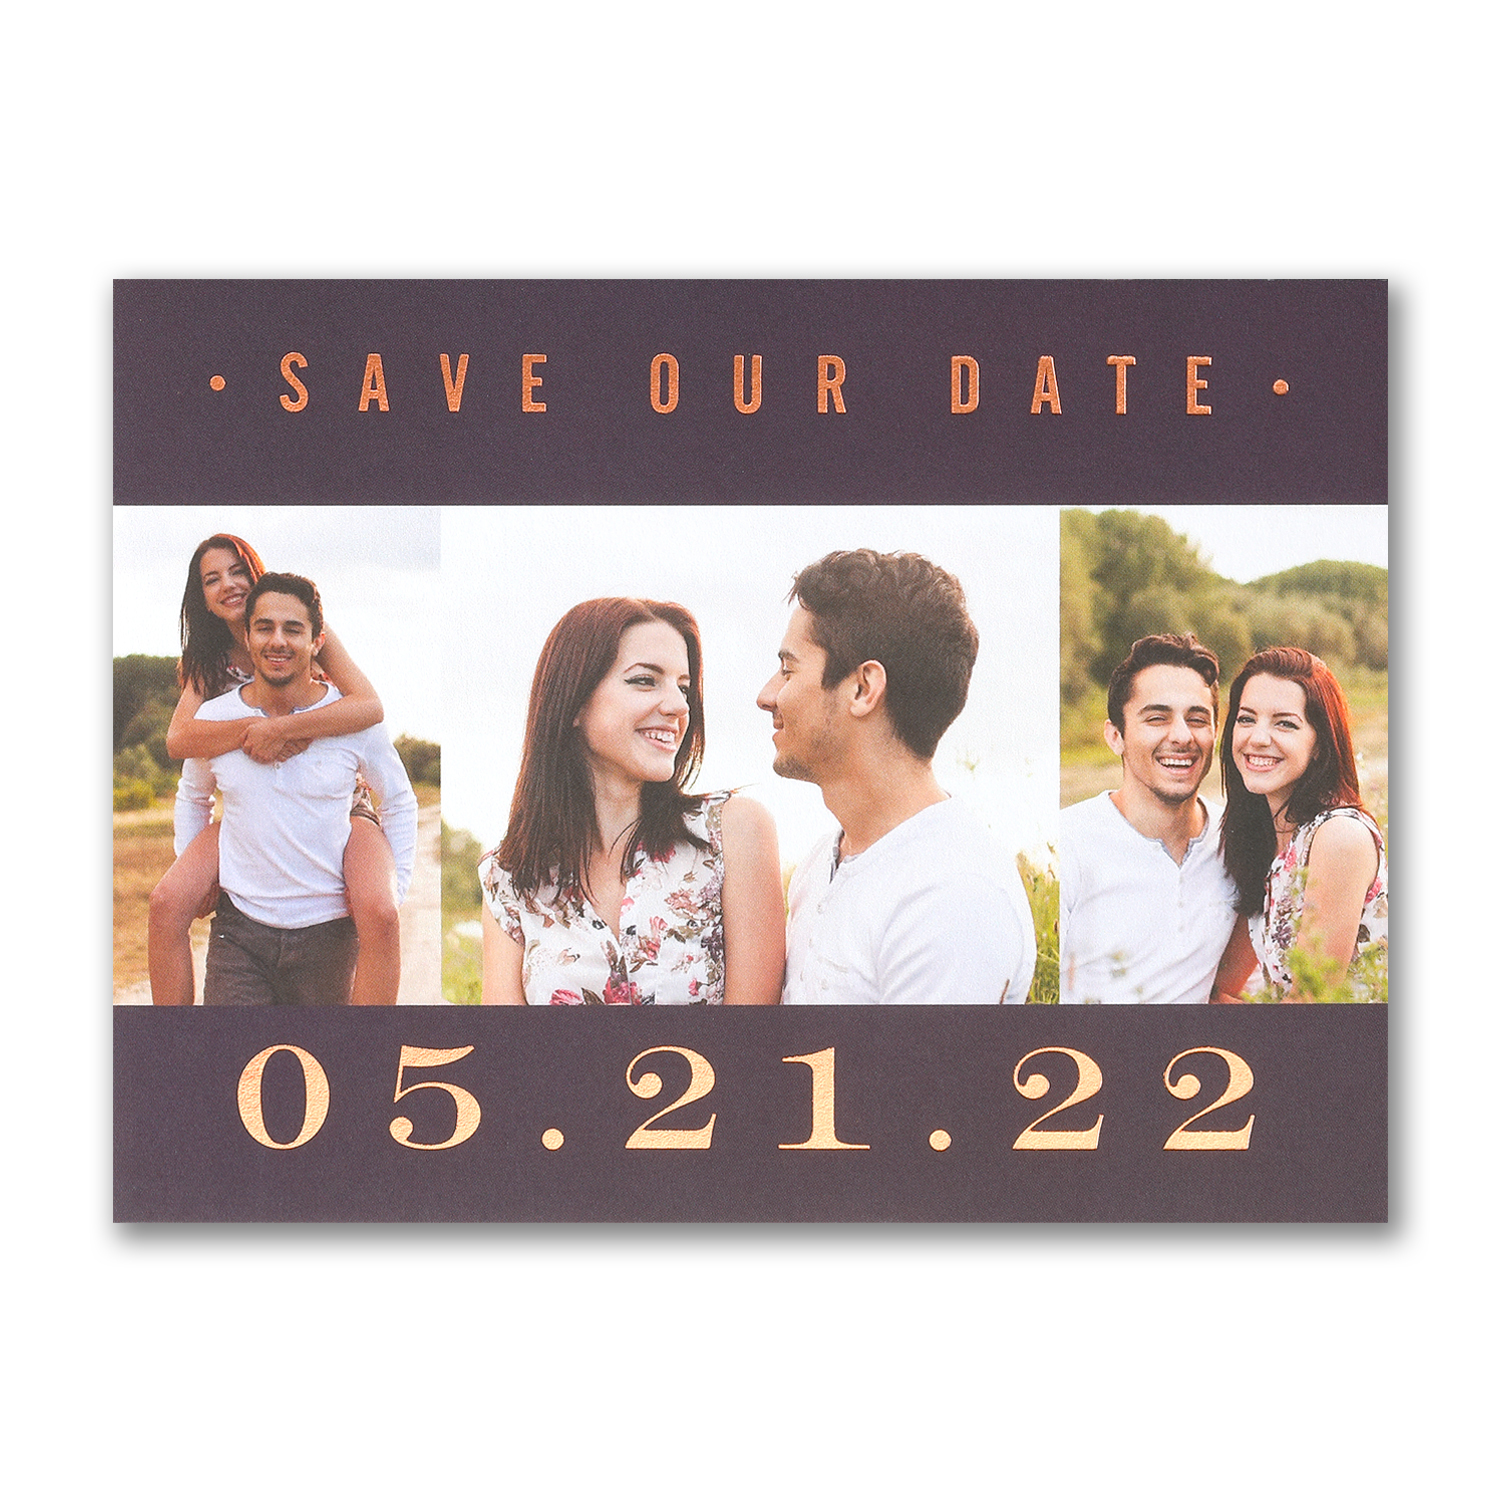 our love photo copper foil save the date carlson craft